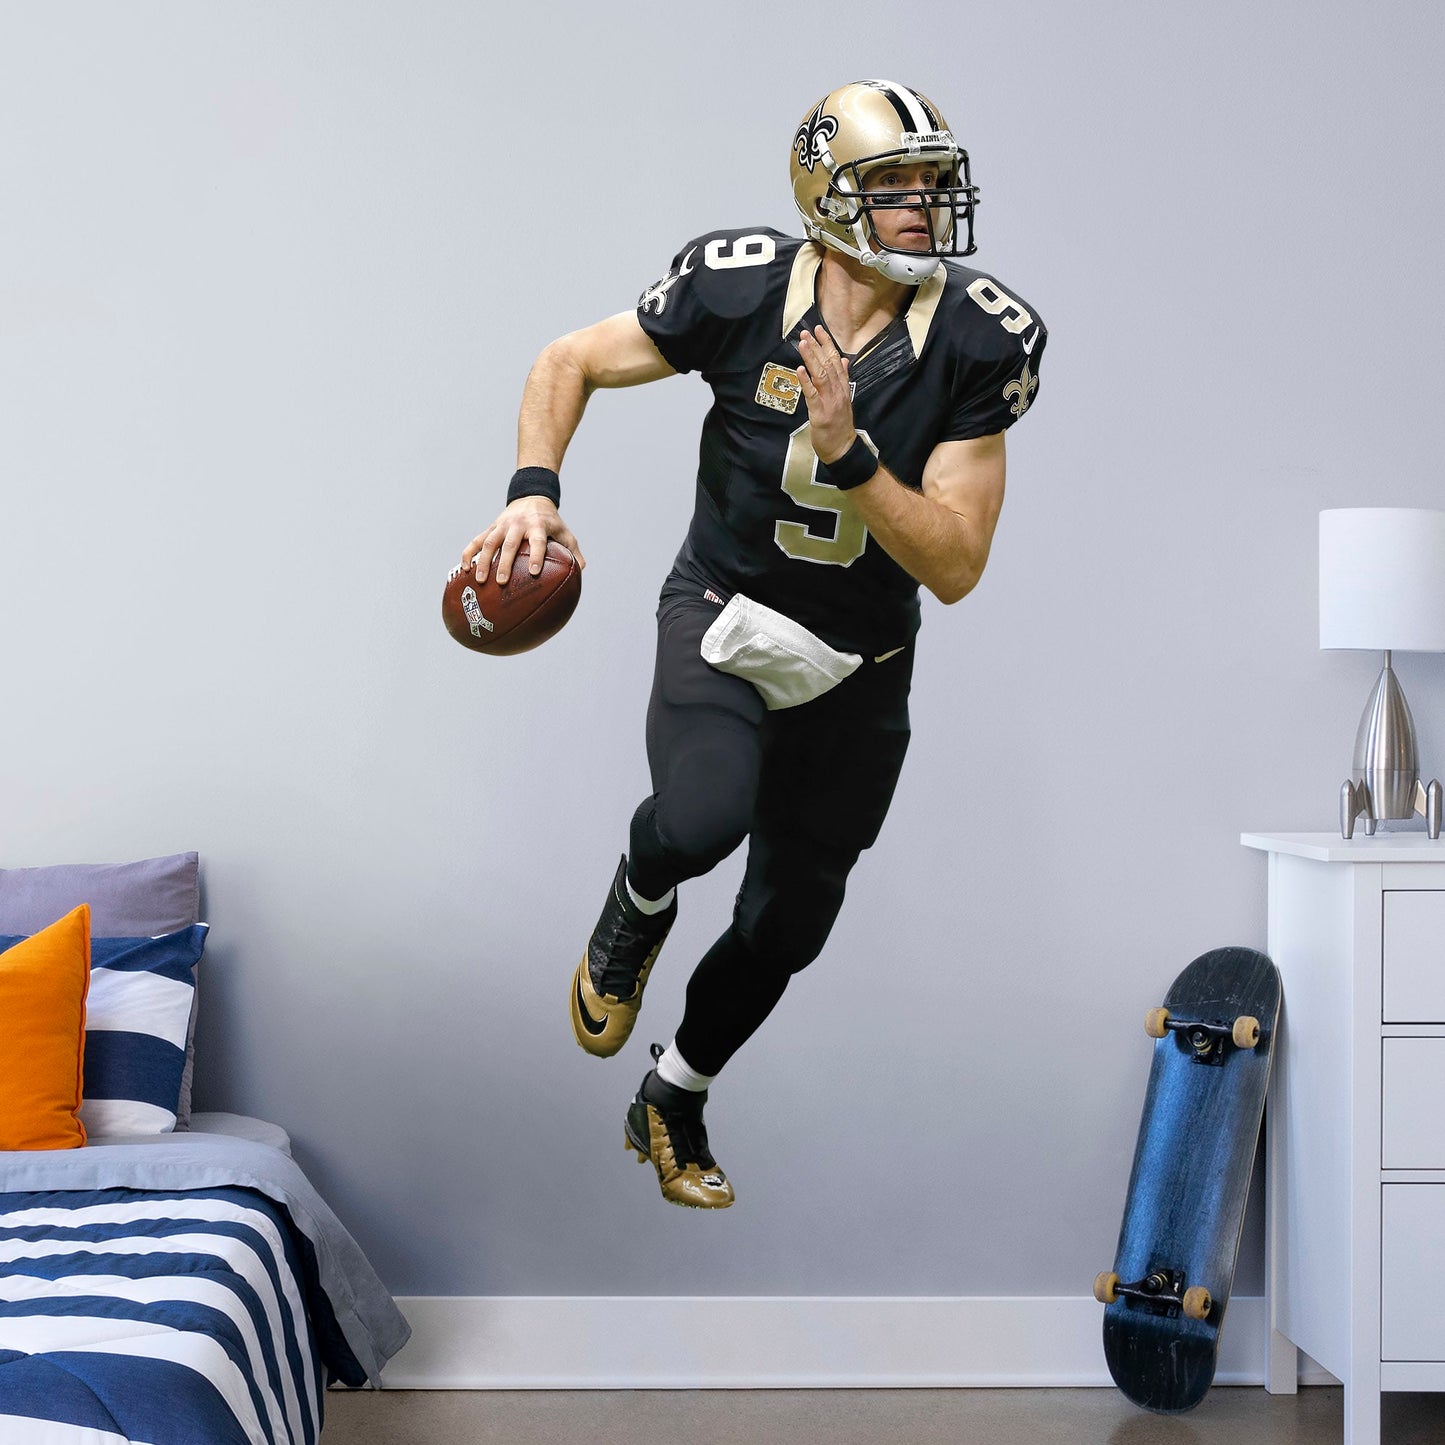 Life-Size Athlete + 1 Decals (29"W x 76"H) Super Bowl MVP, NFL Sportsman of the Year, and perennial fan favorite Drew Brees hustles across your man cave wall with this durable vinyl wall decal. Showcasing the Saints' signature black and old gold with the home game uniform, this decal turns your sports bar, bedroom, or dorm room into your personal Superdome. The reusable, high quality vinyl won't damage walls, making it the perfect choice if you need to take your Saints fandom on the road.